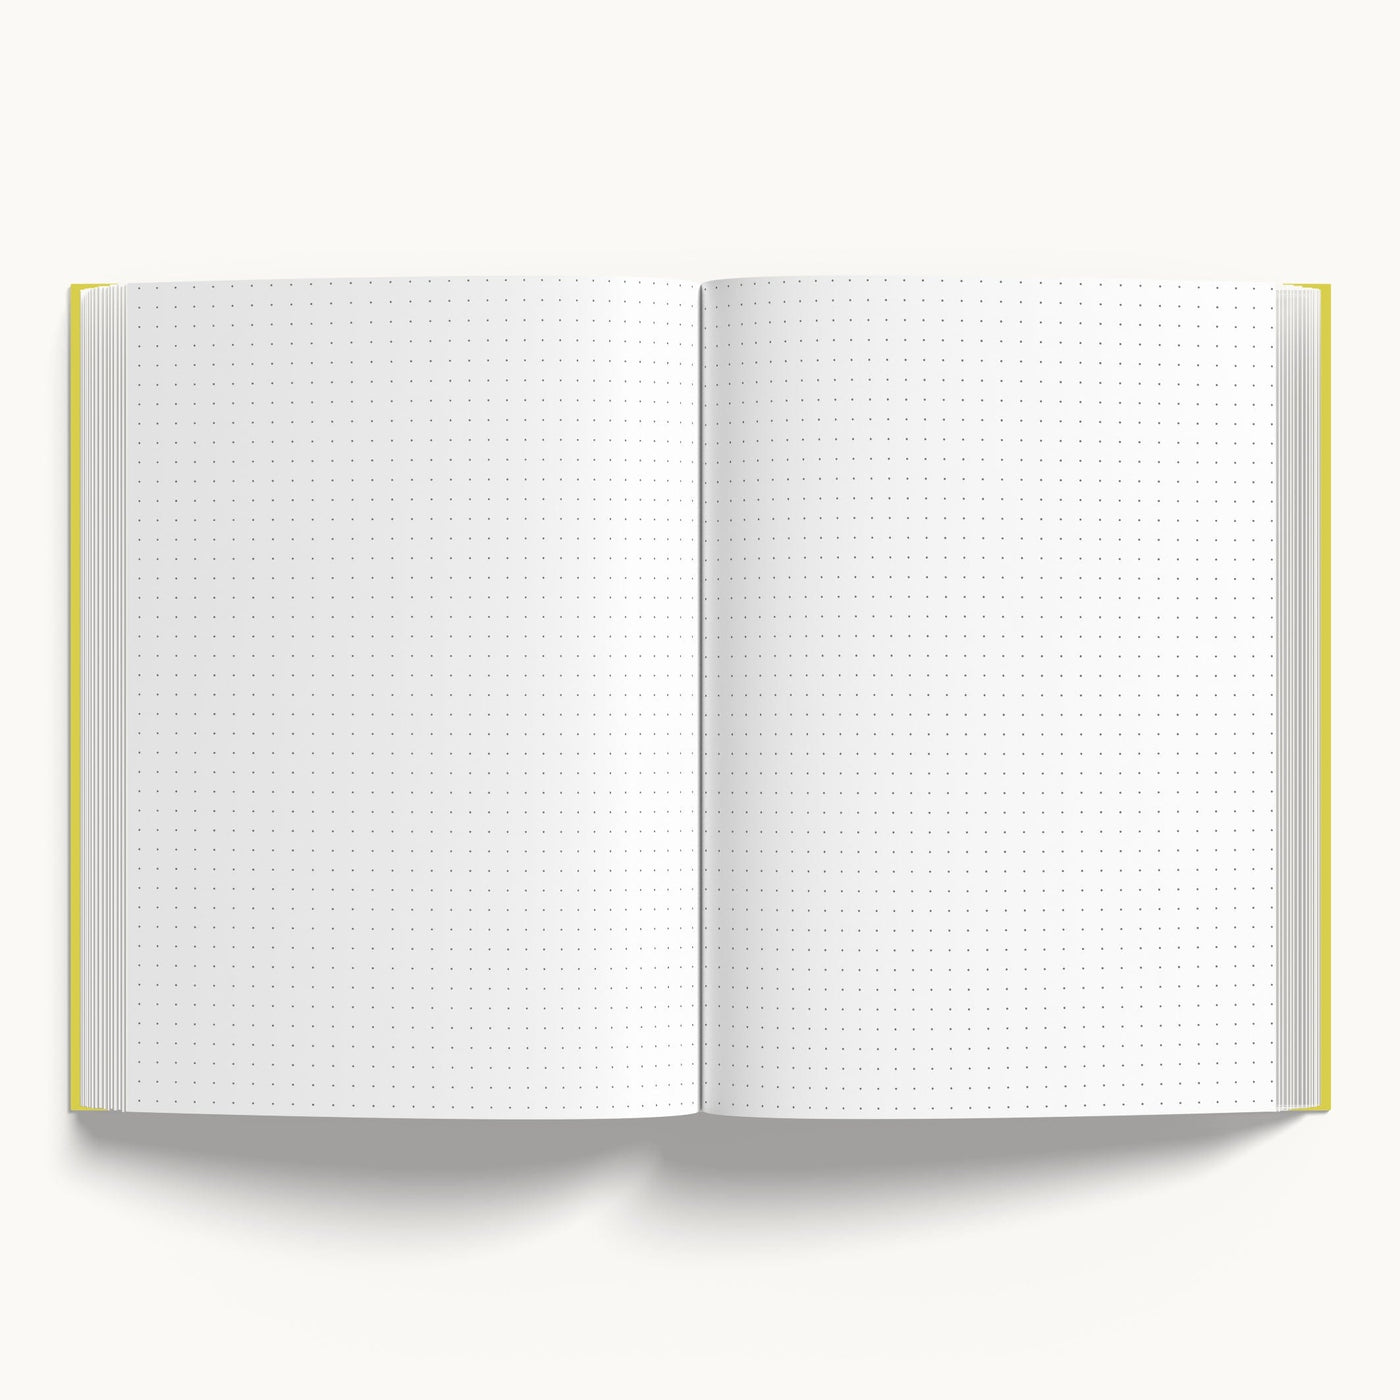 Dot Grid Make dreams happen A5 Notebook (Ruled) 160 pages